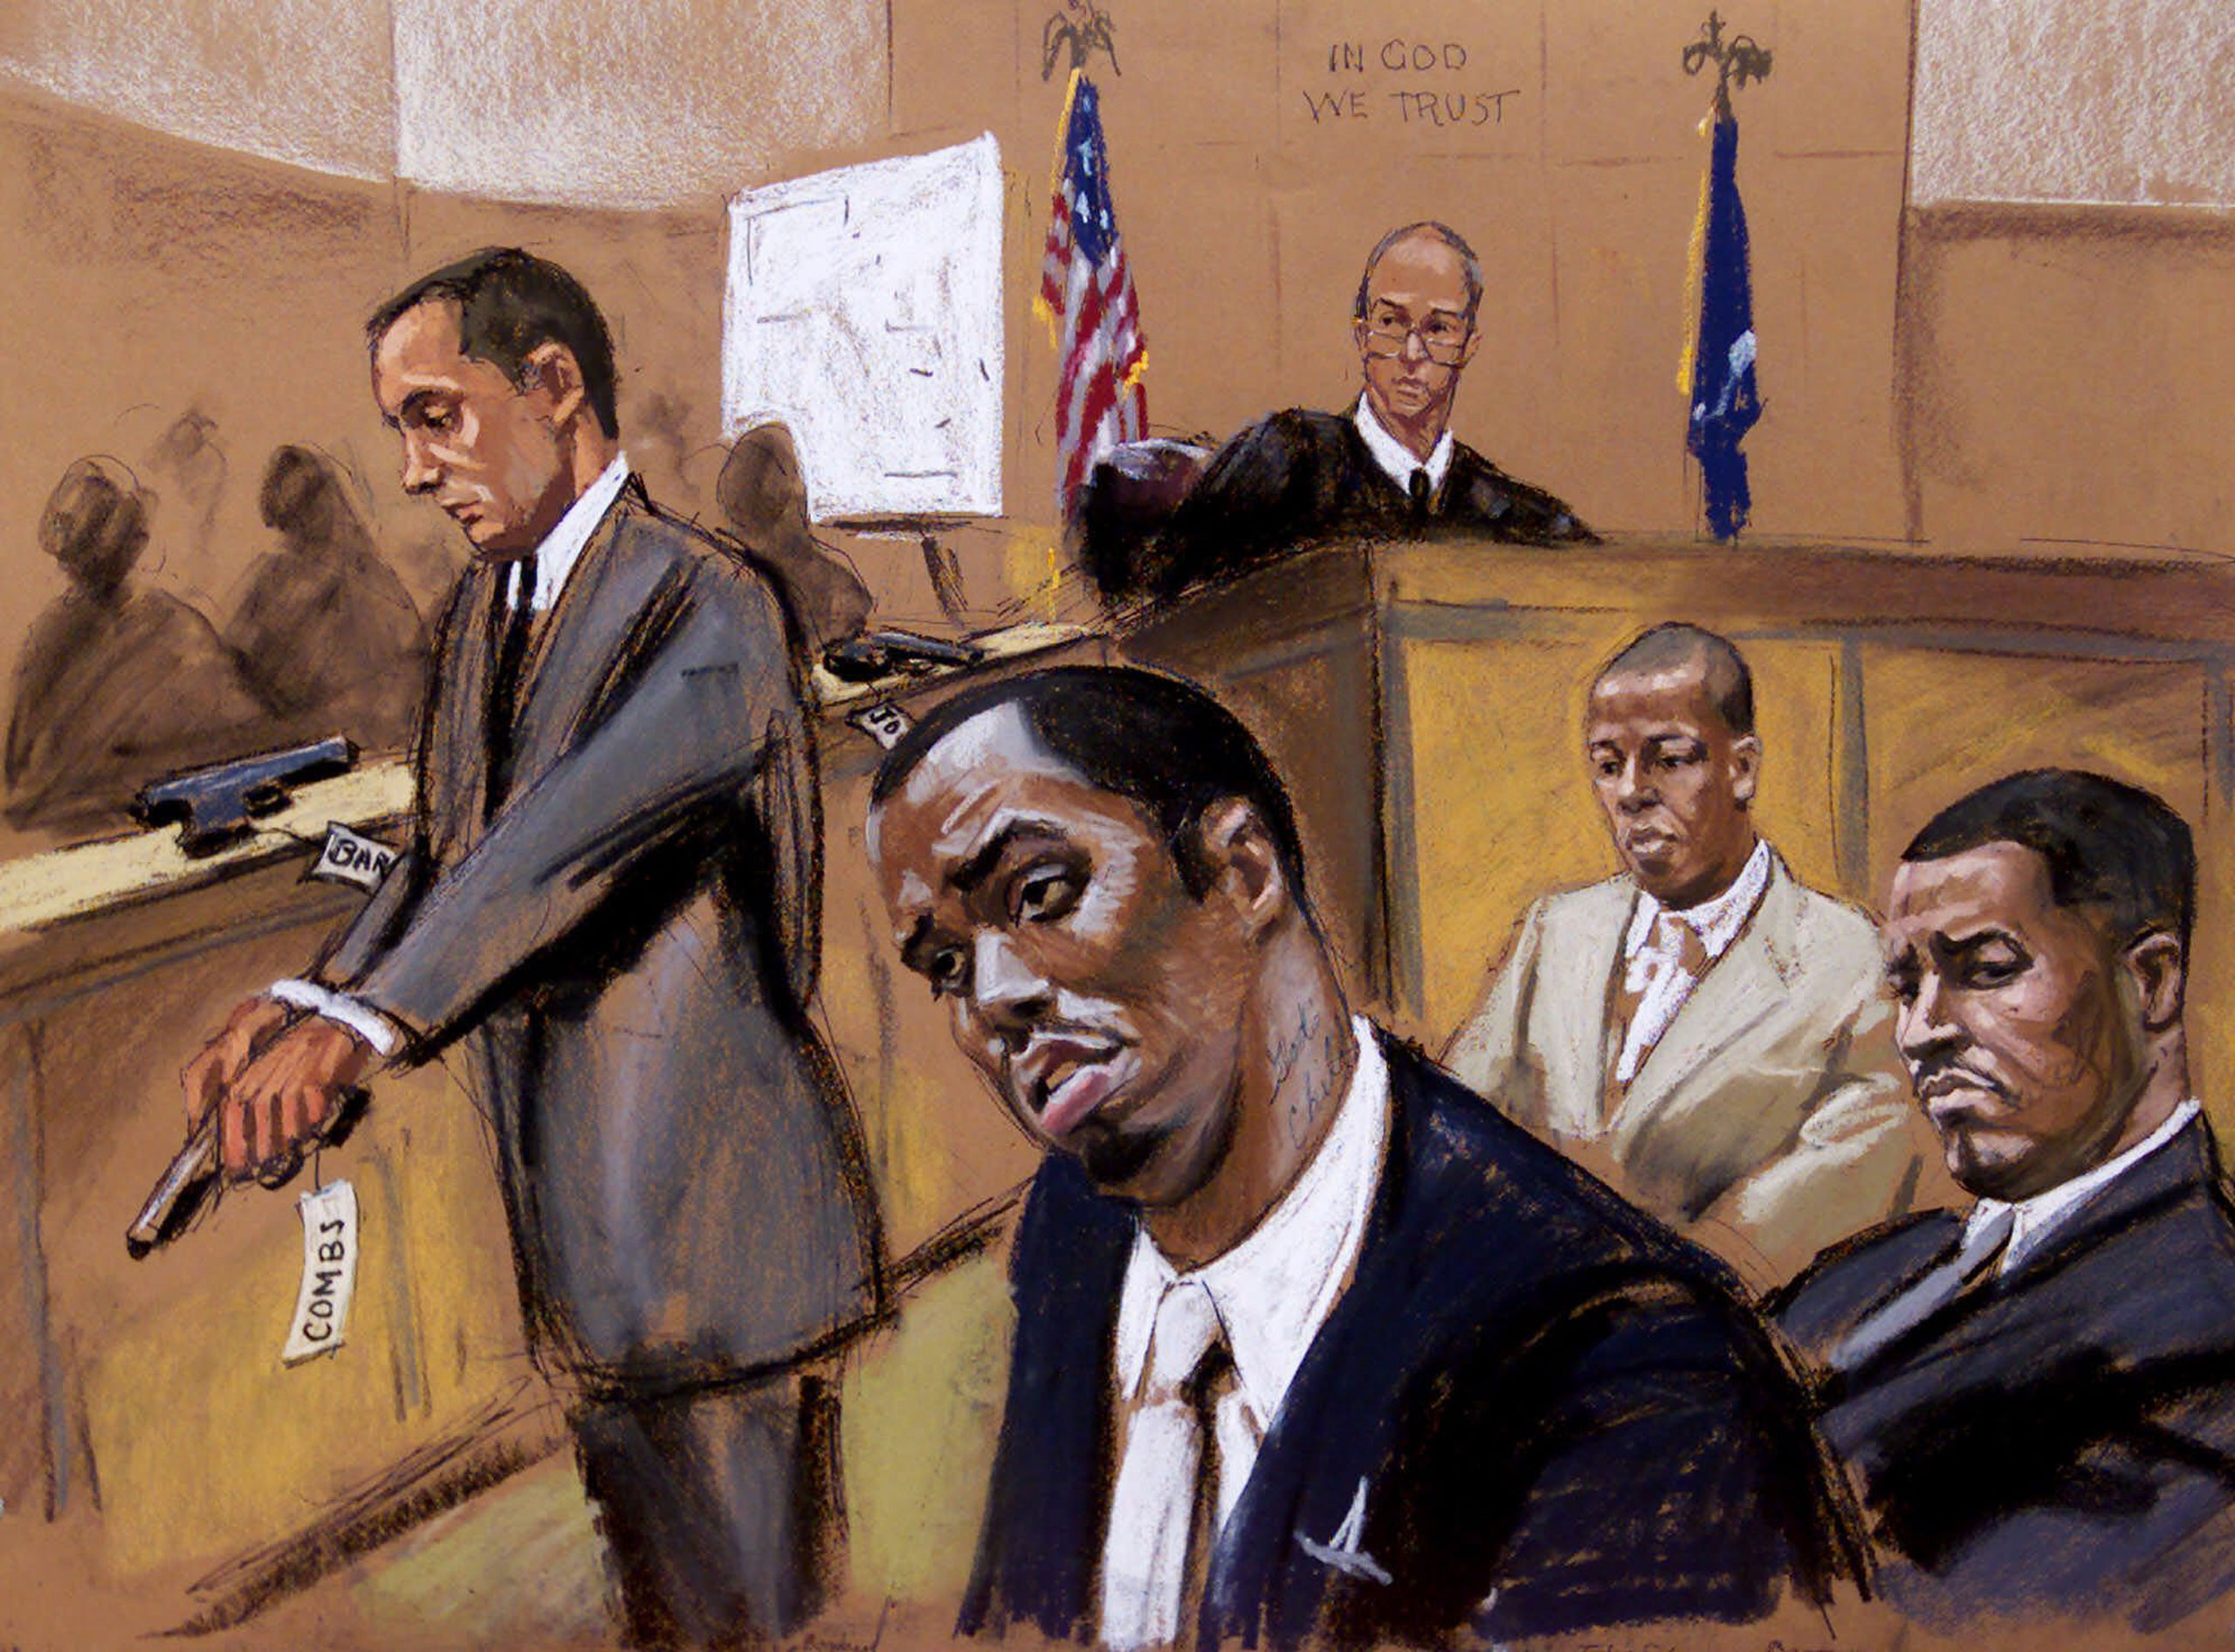 Assistant District Attorney Matthew Bogdanos holds a gun during his final summation to the jury in the trial of Sean  Puffy  Combs on March 13, 2001 in New York. Combs was was acquitted of weapon possession and attempted bribery charges in a case stemming from a 1999 shooting at a New York dance club.